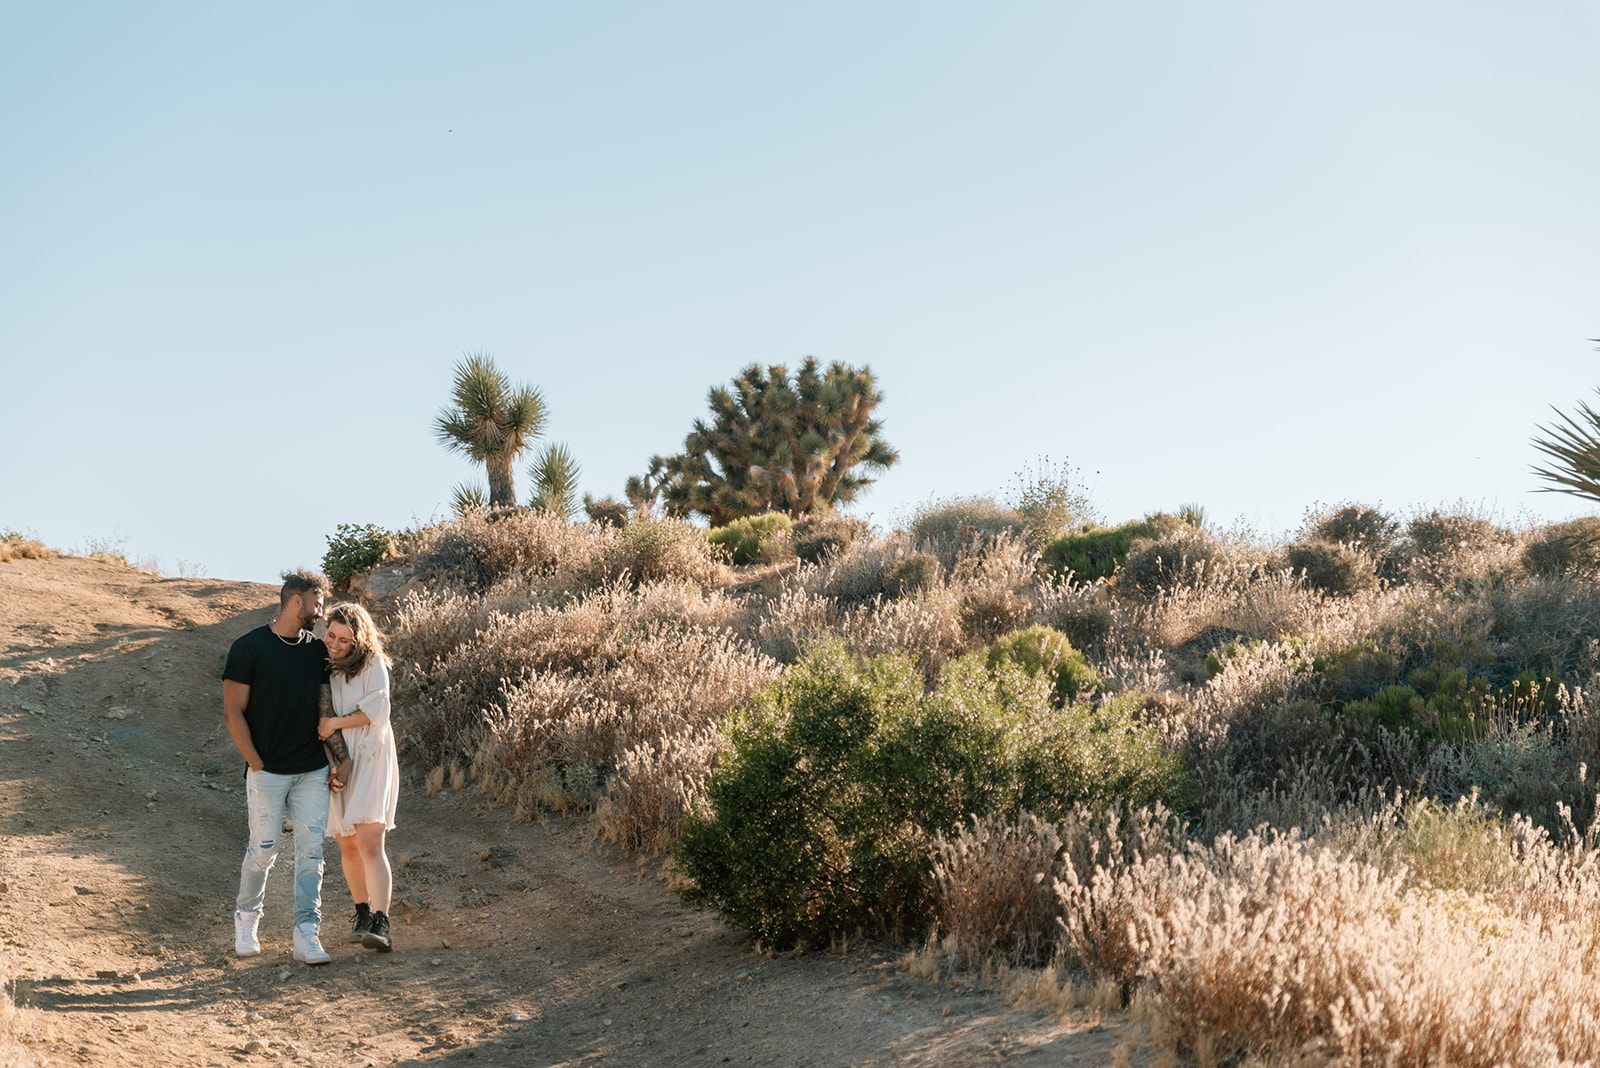 Man and woman snuggle and walk down dusty desert path together